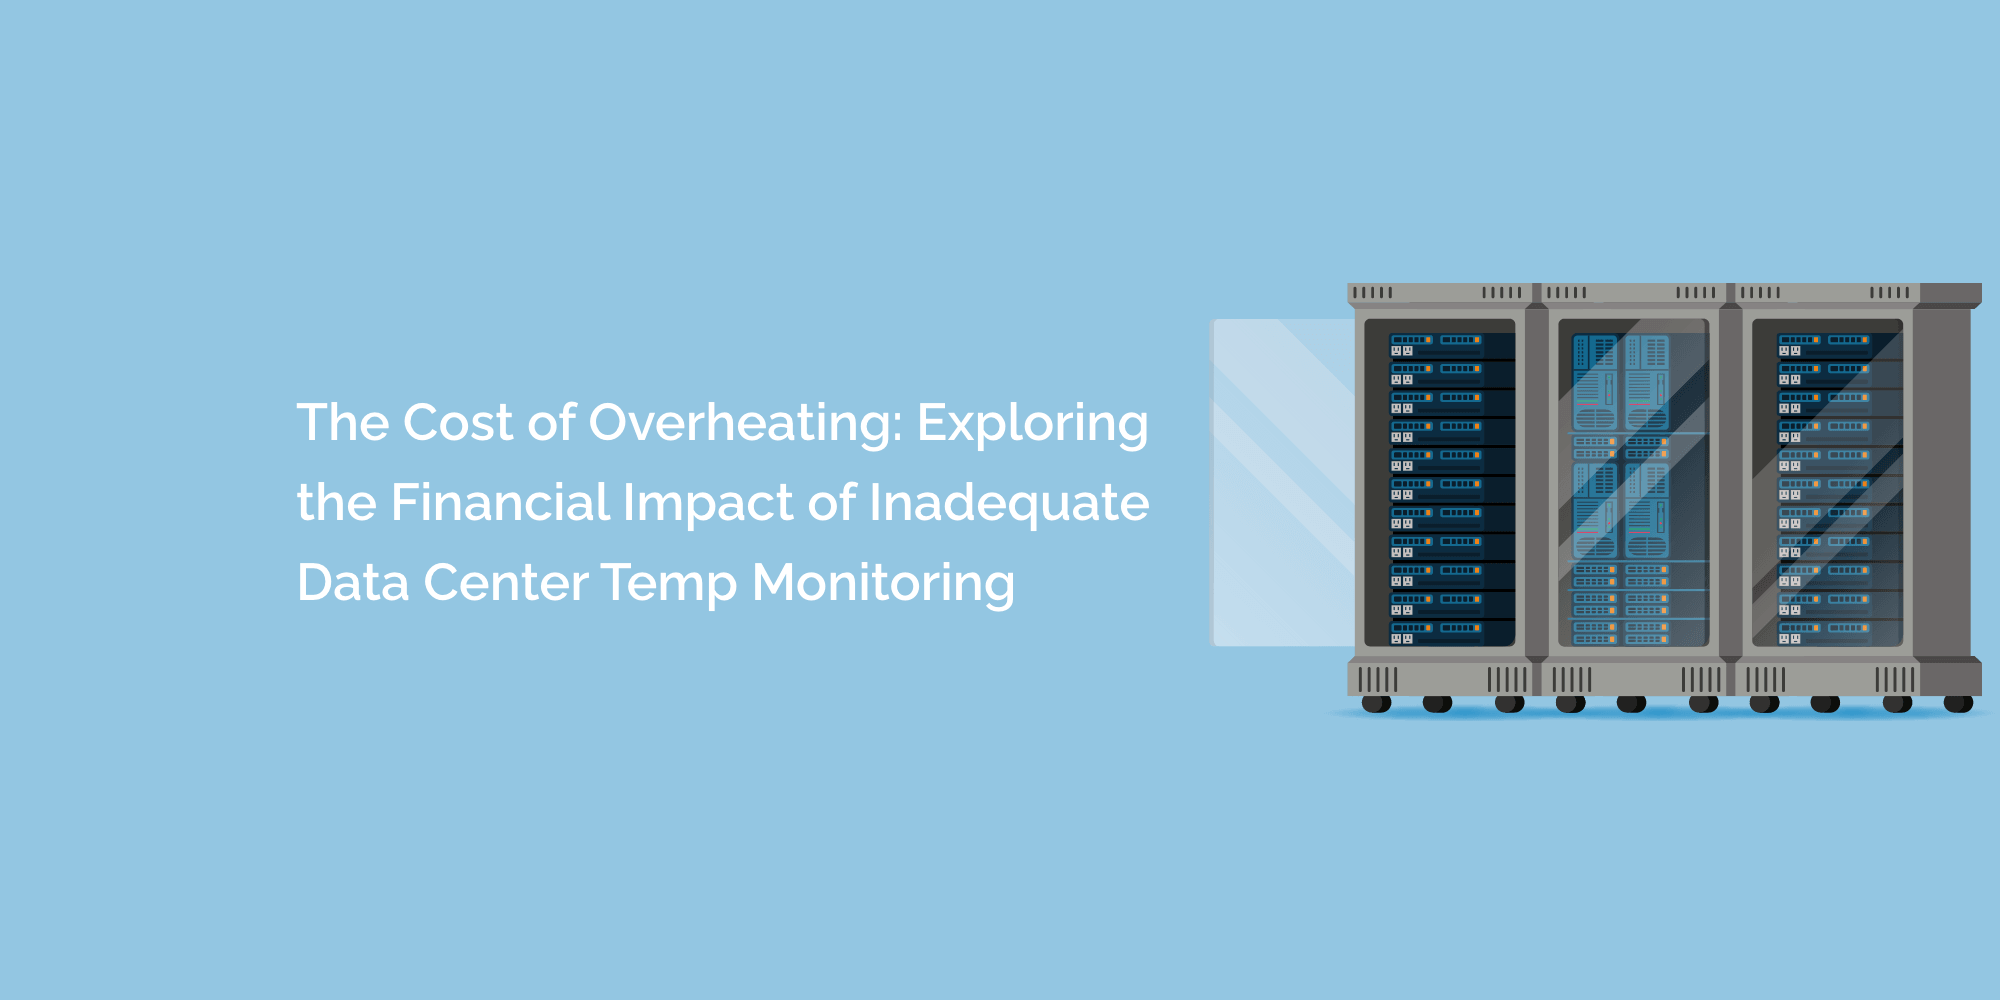 The Cost of Overheating: Exploring the Financial Impact of Inadequate Data Center Temp Monitoring